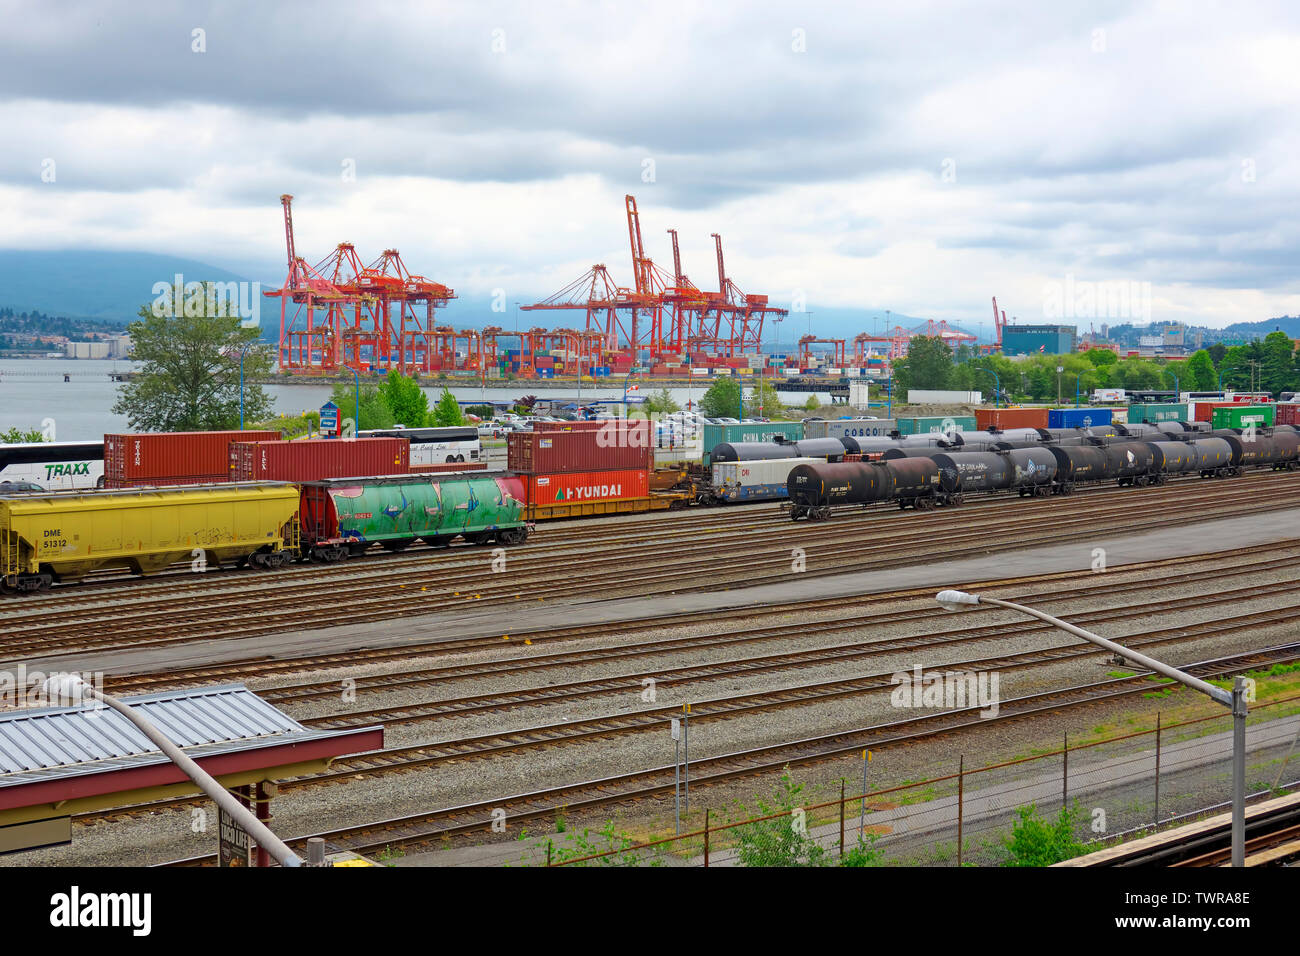 Shipping Containers at Canada Place Cruise Ship Terminal and Freight Trains Along Railroad Tracks in Vancouver, B. C. Stock Photo